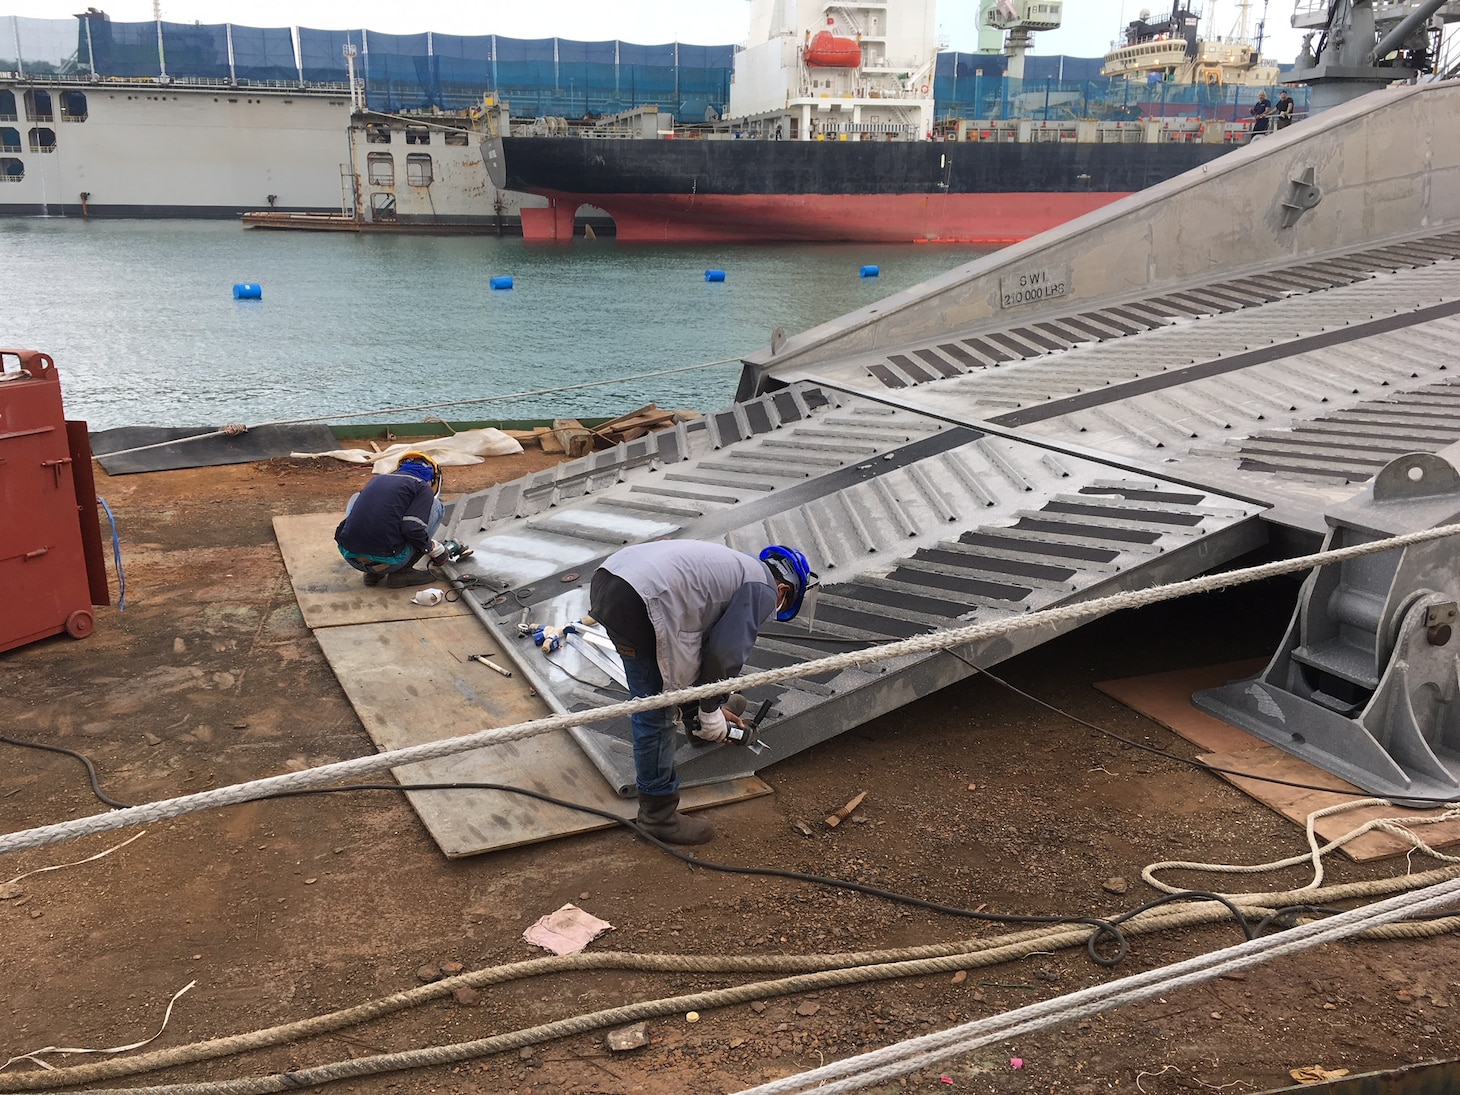 The expeditionary fast transport ship USNS Fall River (T-EPF-4) conducts weld repairs on the stern ramp during a voyage repair availability in Laem Chabang, Thailand, Feb. 12. Fall River is assigned to Destroyer Squadron 7 in U.S. 7th Fleet area of responsibility, providing logistical solutions to the region's littorals and working hull-to-hull with partner navies to provide 7th Fleet with the flexible capabilities it needs now and in the future.